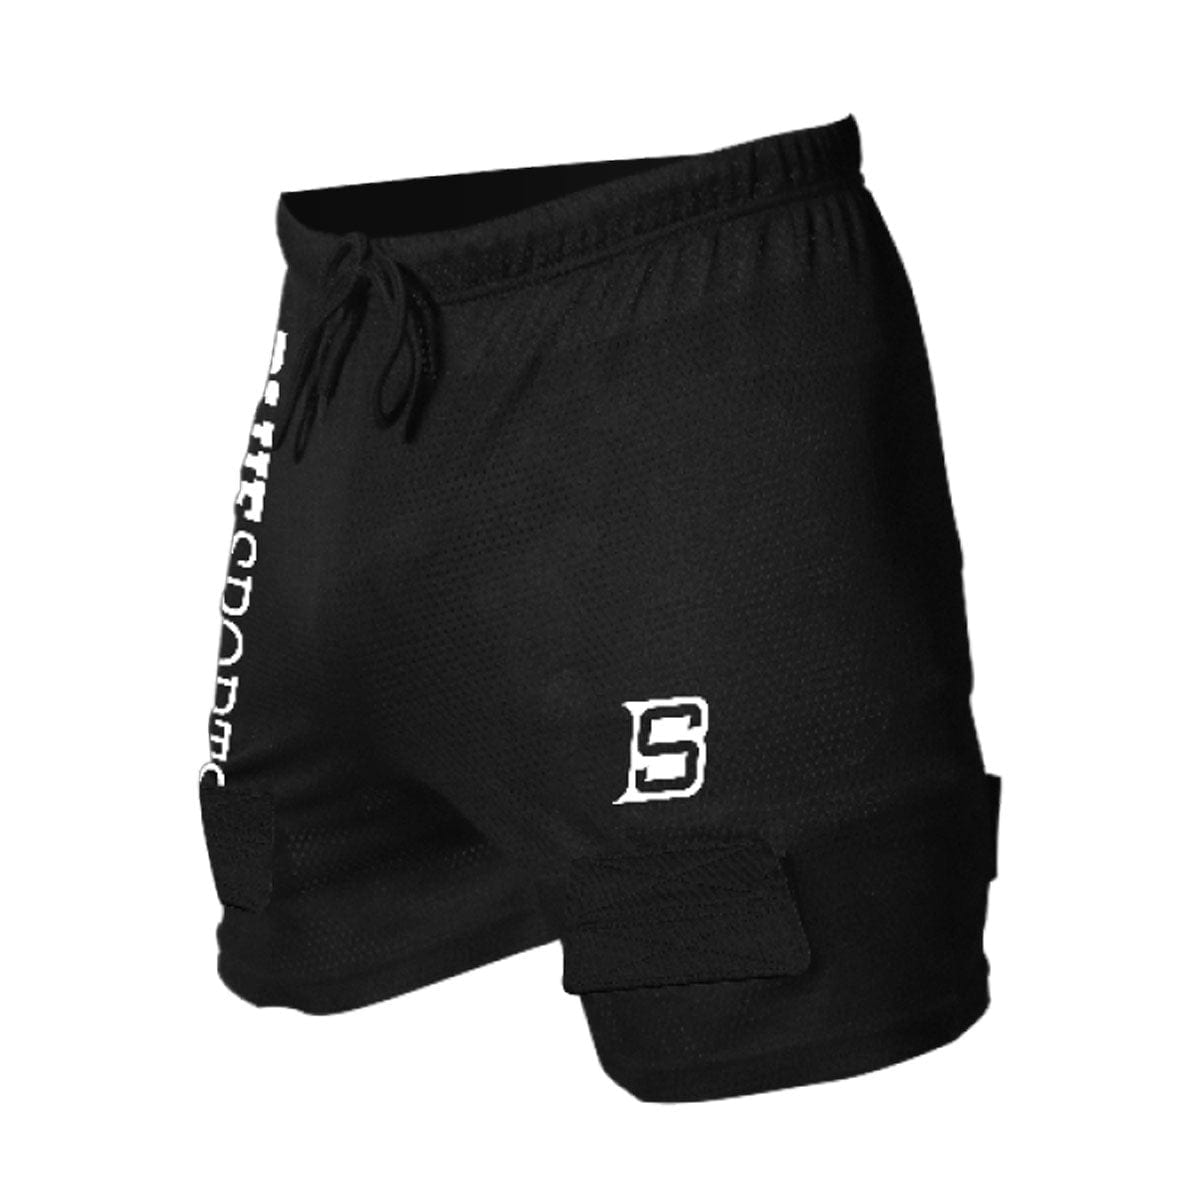 Blue Sports Classic Youth Mesh Jock Shorts - The Hockey Shop Source For Sports